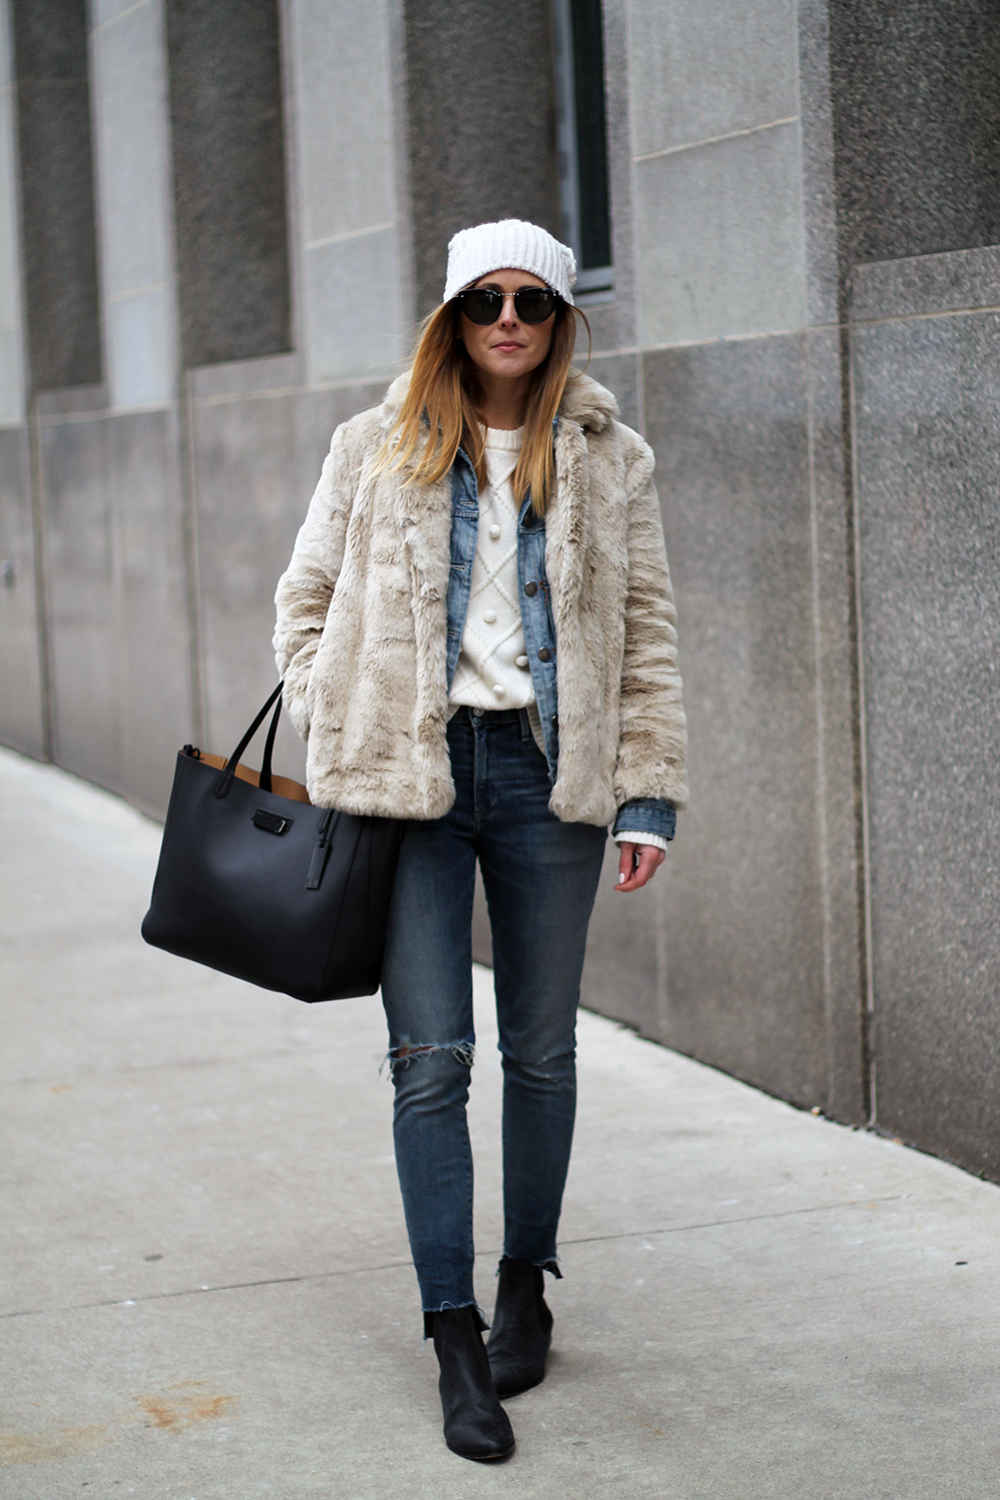 Outfits File: Faux Fur and Denim | THE VAULT FILES